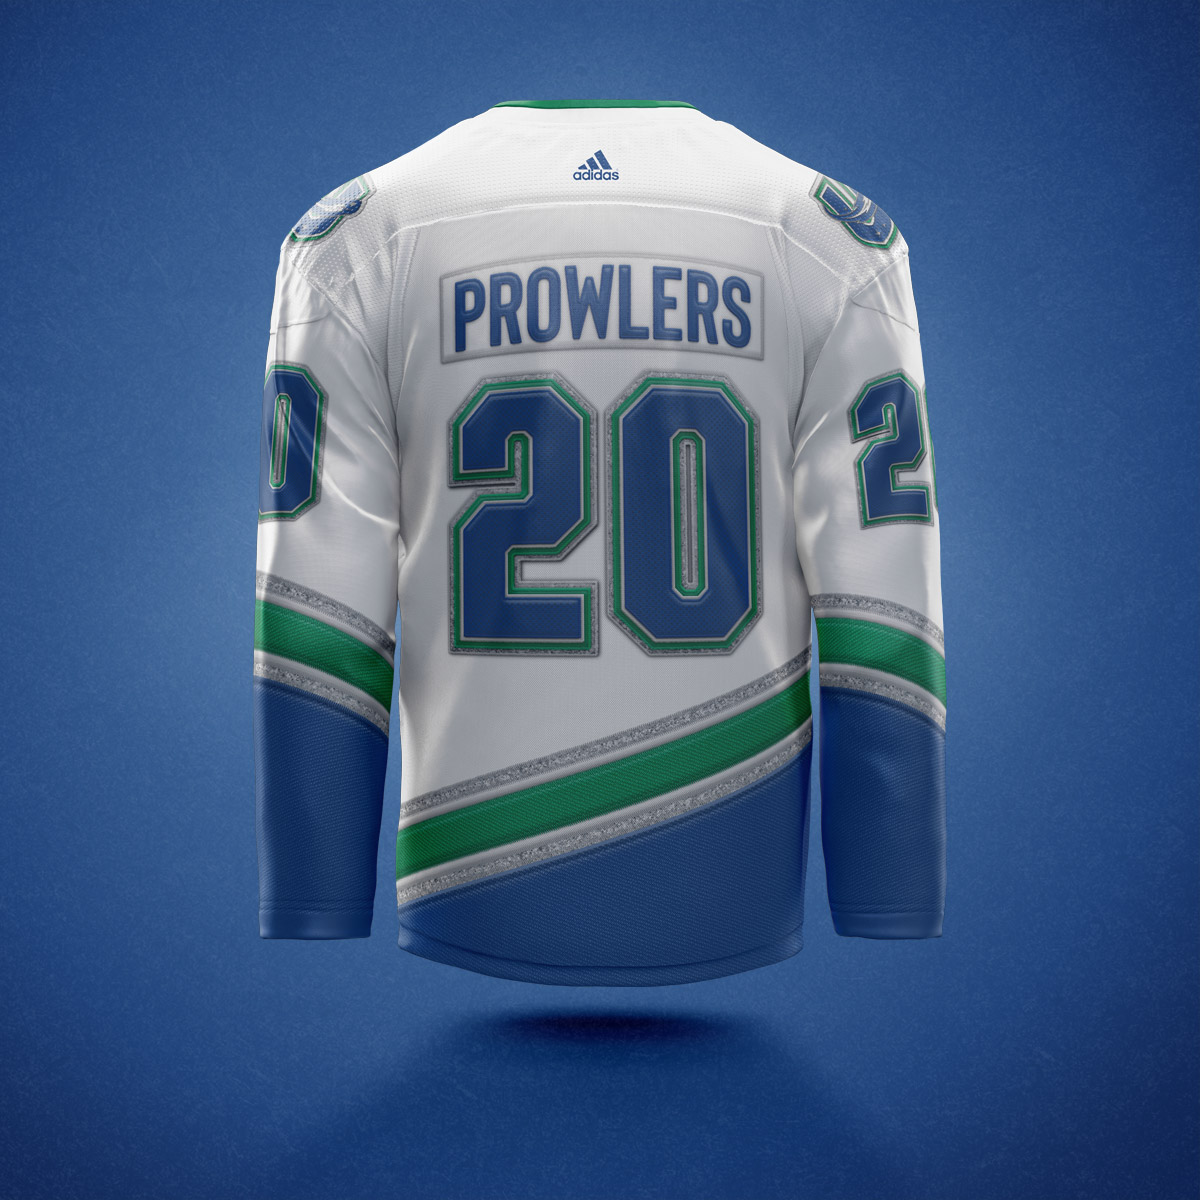 The Utica Comets are going to wear jerseys inspired by the Canucks' Flying  Skate design - Article - Bardown